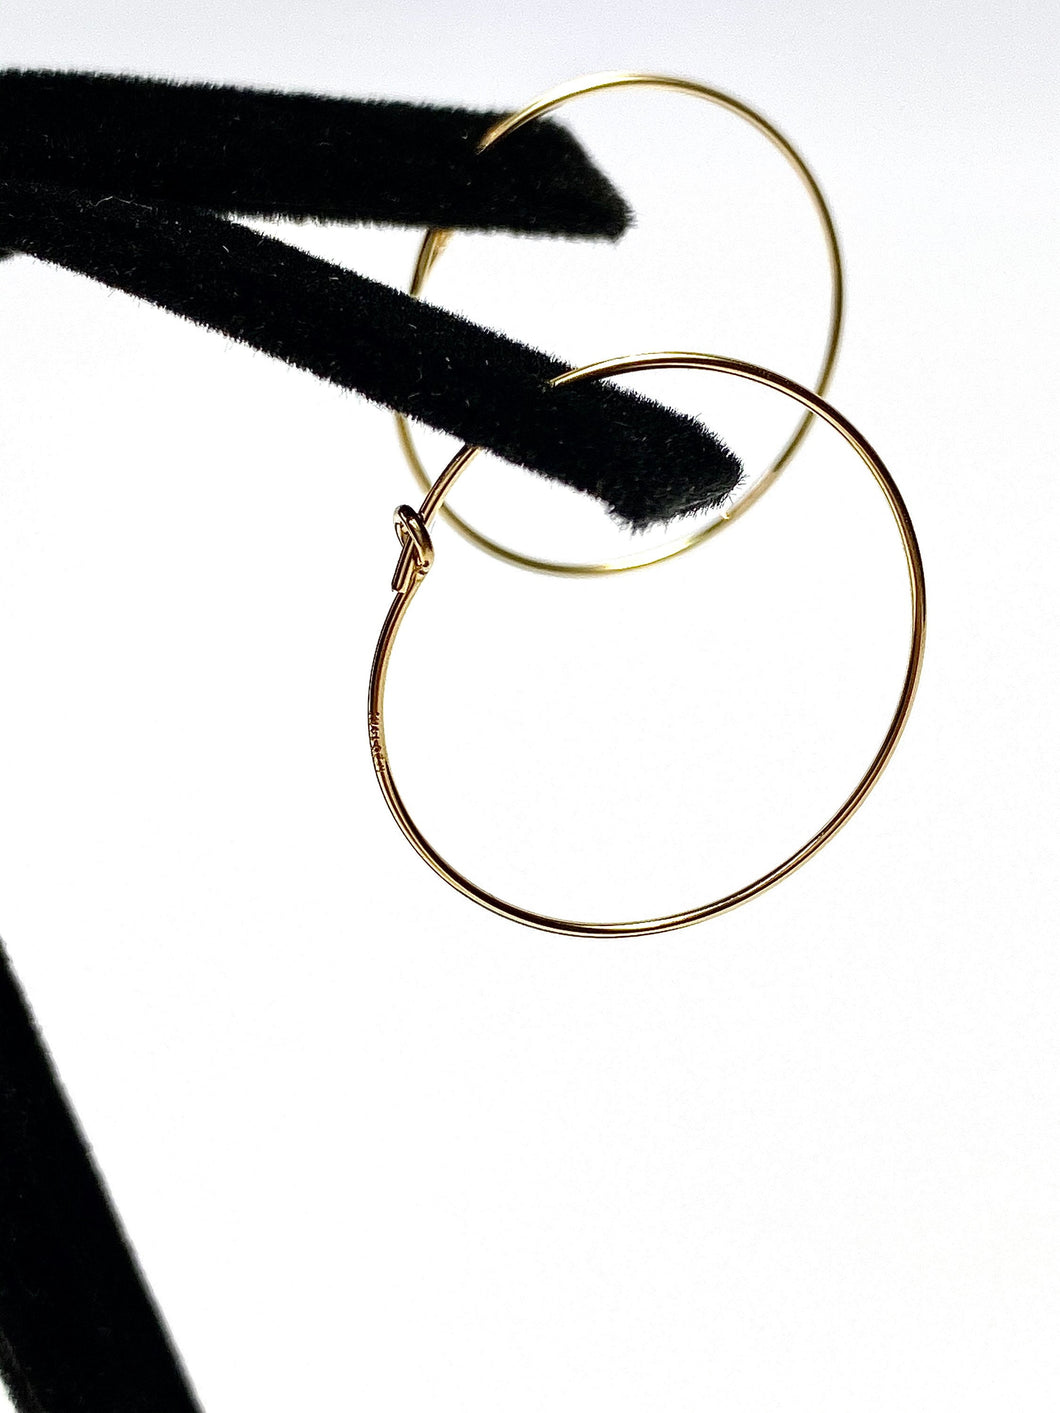 0.70x25.0mm Wire Beading Hoop, 14k gold filled. Made in USA. #4011806